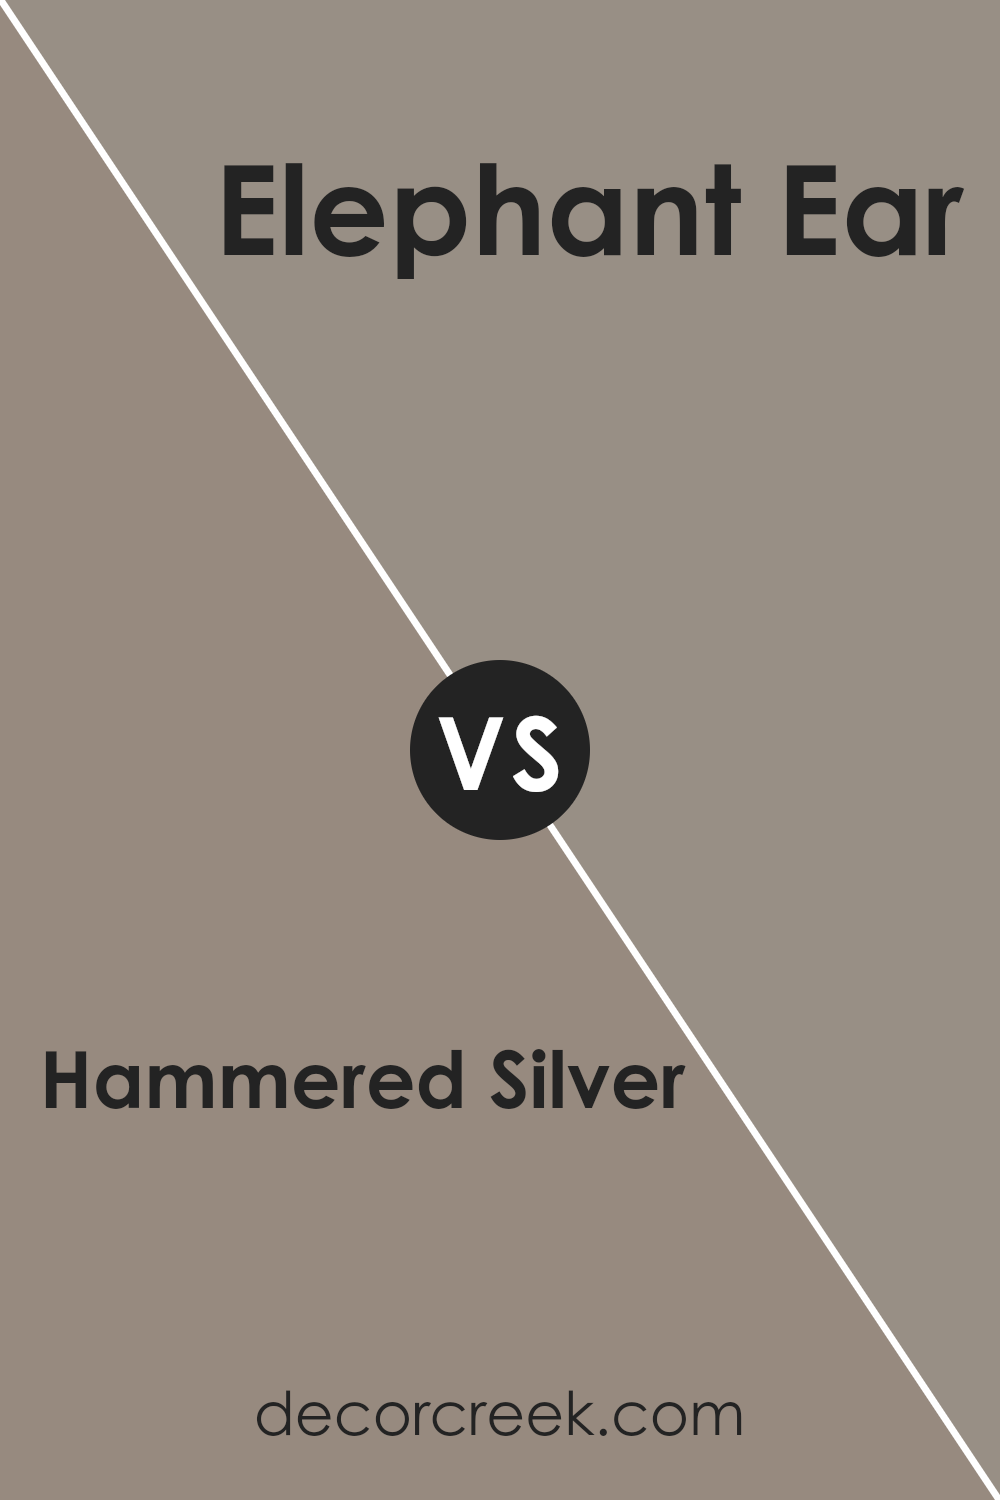 hammered_silver_sw_2840_vs_elephant_ear_sw_9168